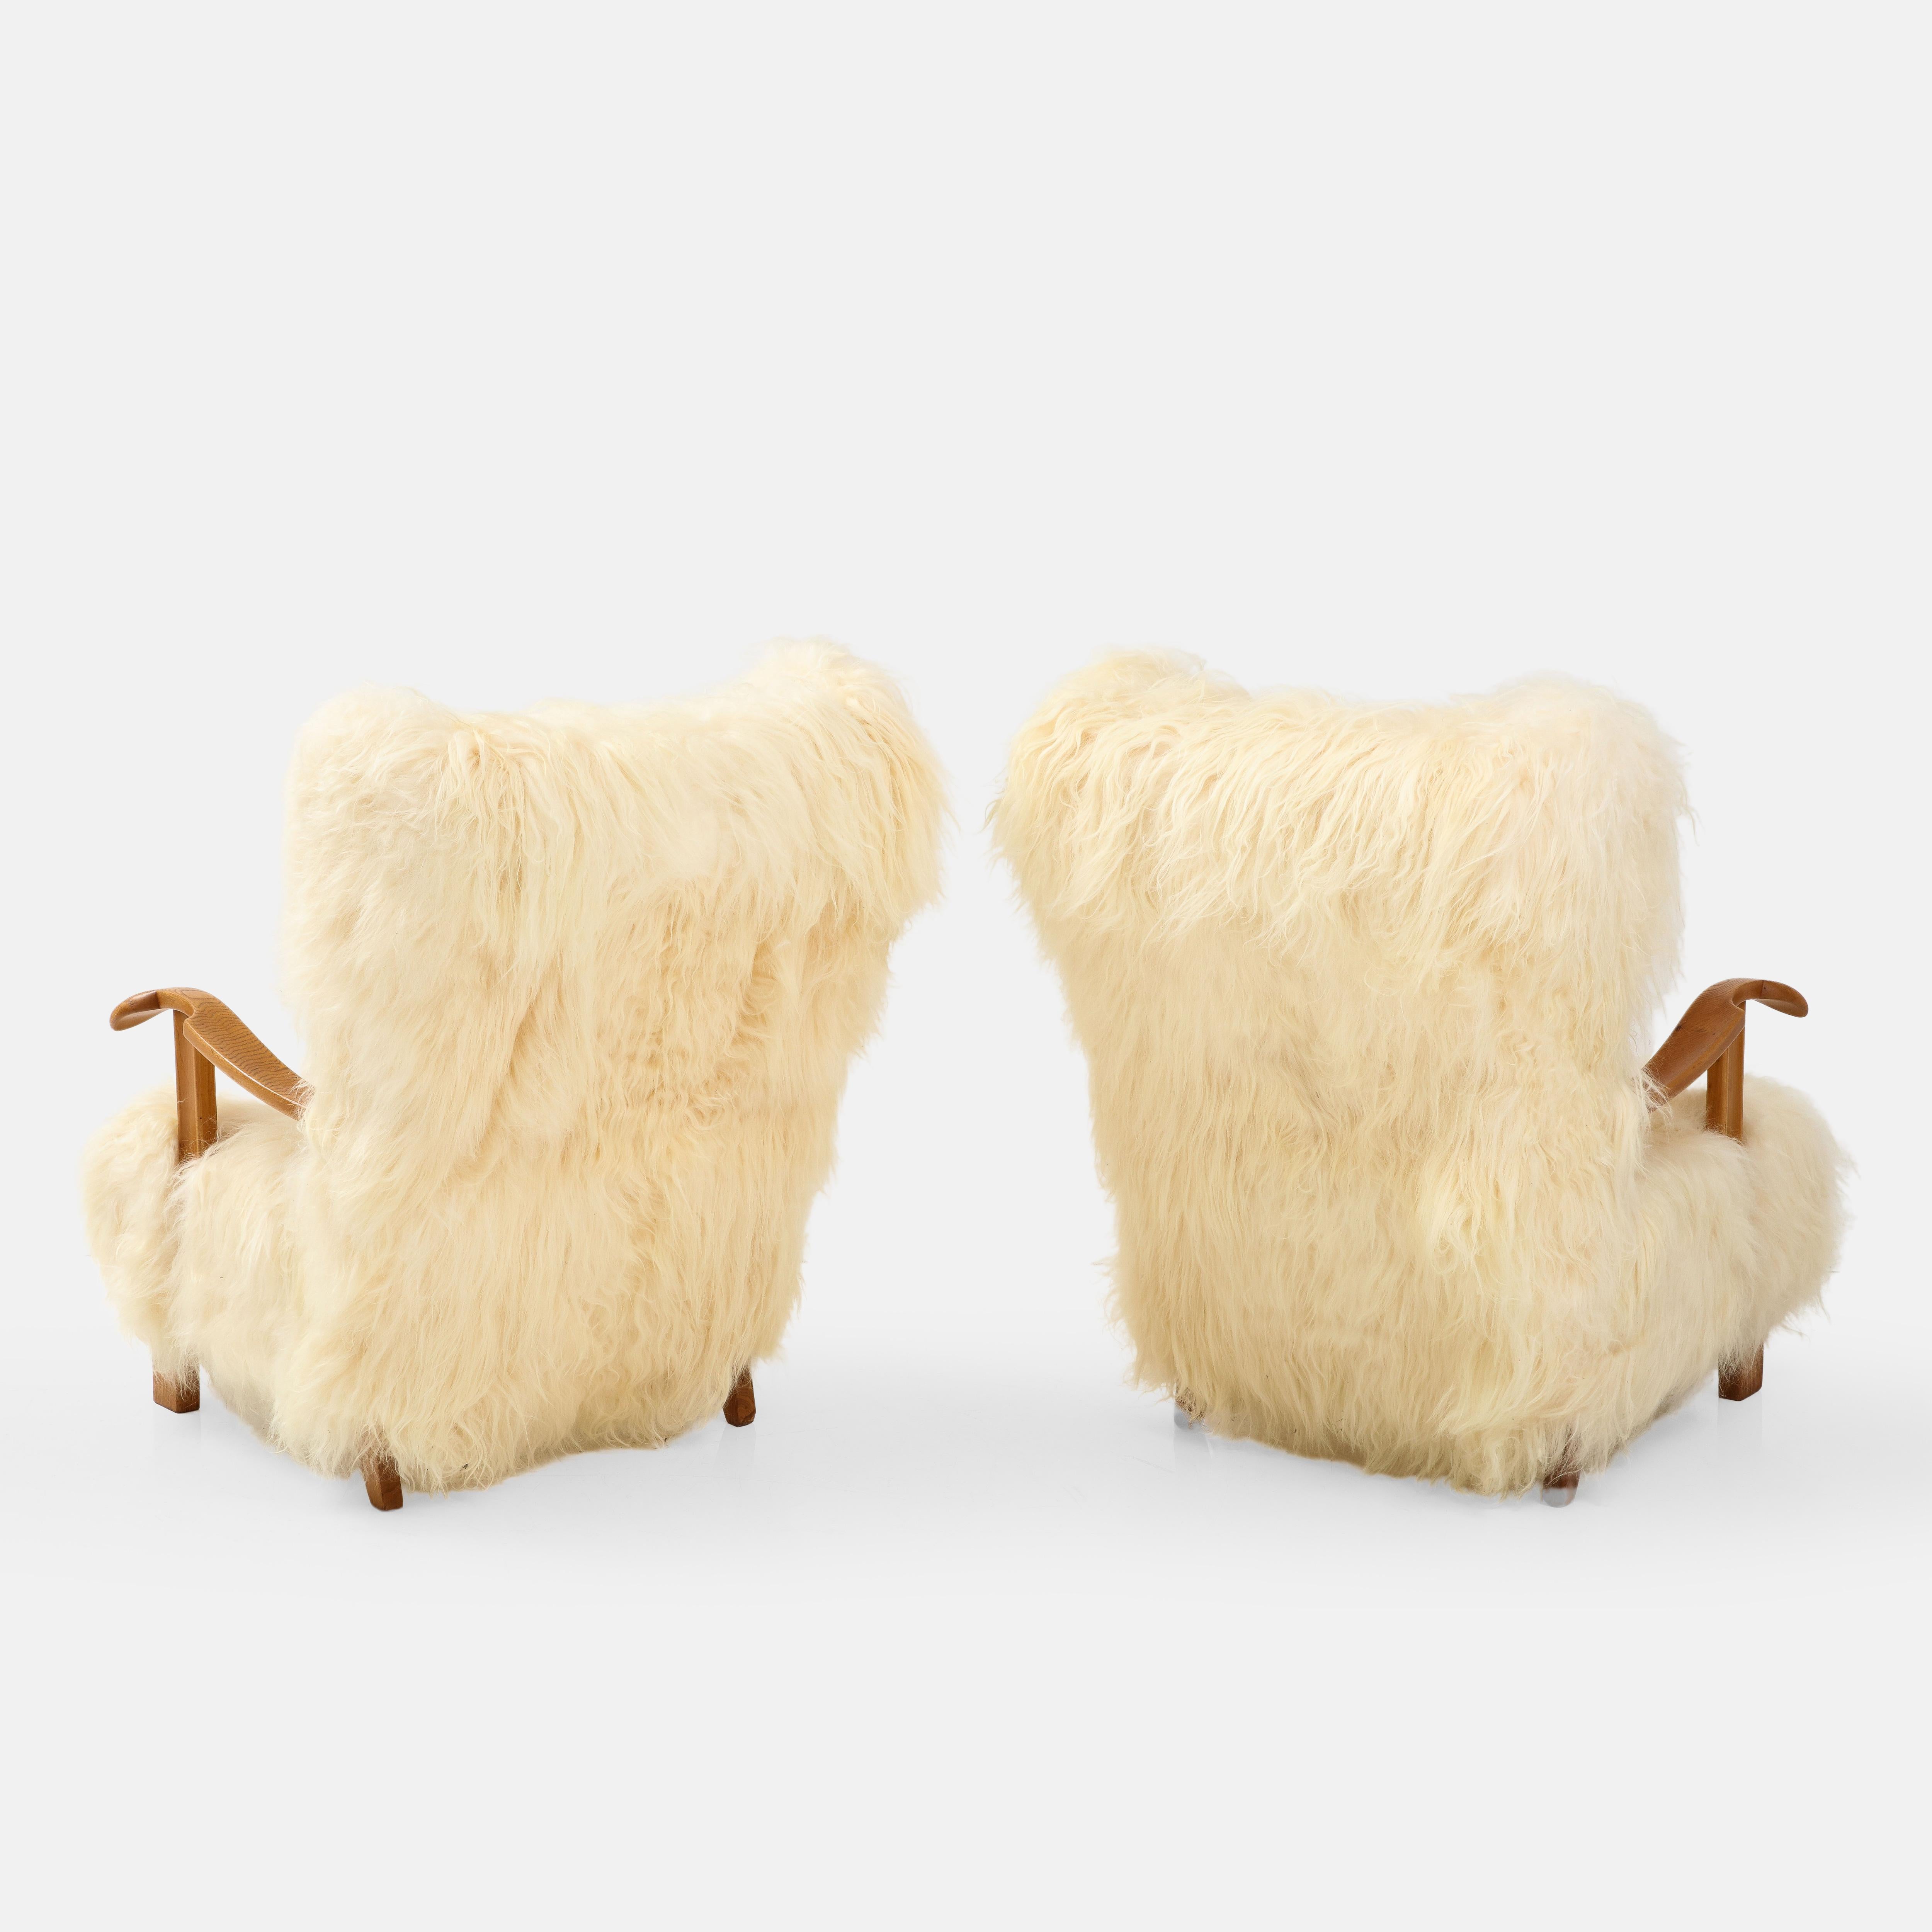 Lambskin Fritz Hansen Rare Pair of Wingback Lounge Chairs Model 1582 in Sheepskin, 1930s For Sale